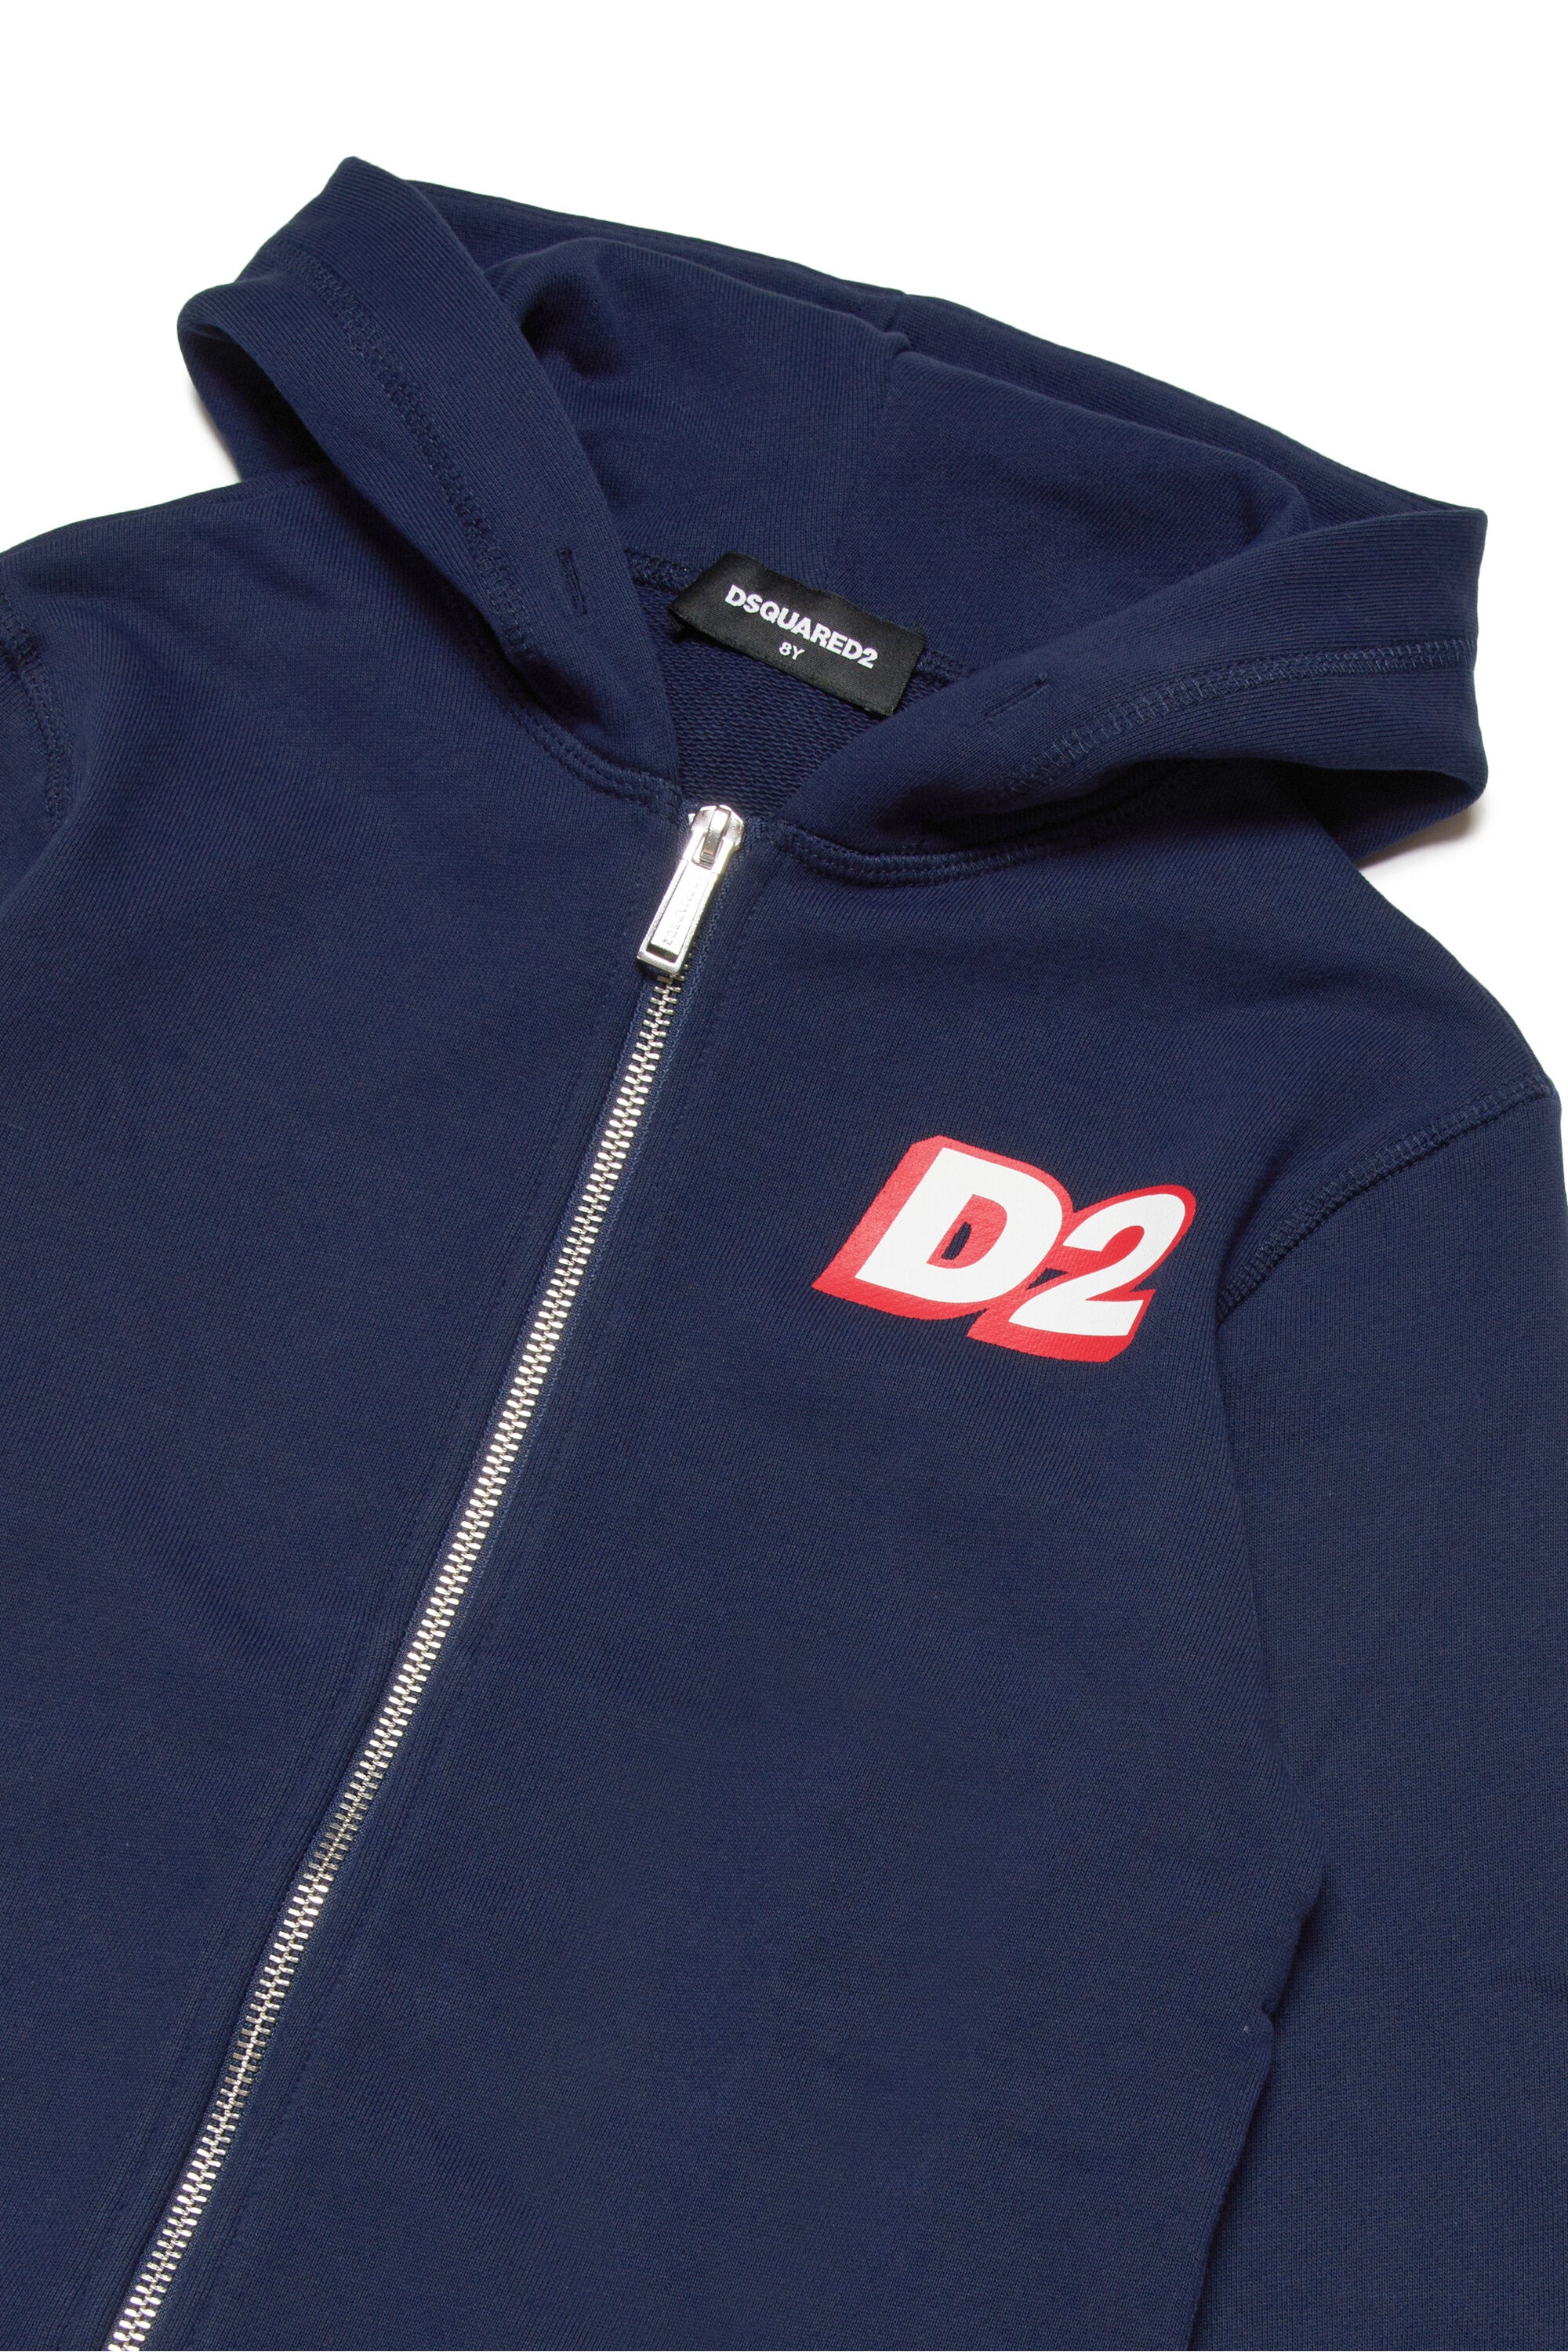 Hooded cotton loungewear sweatshirt with D2 logo and zip